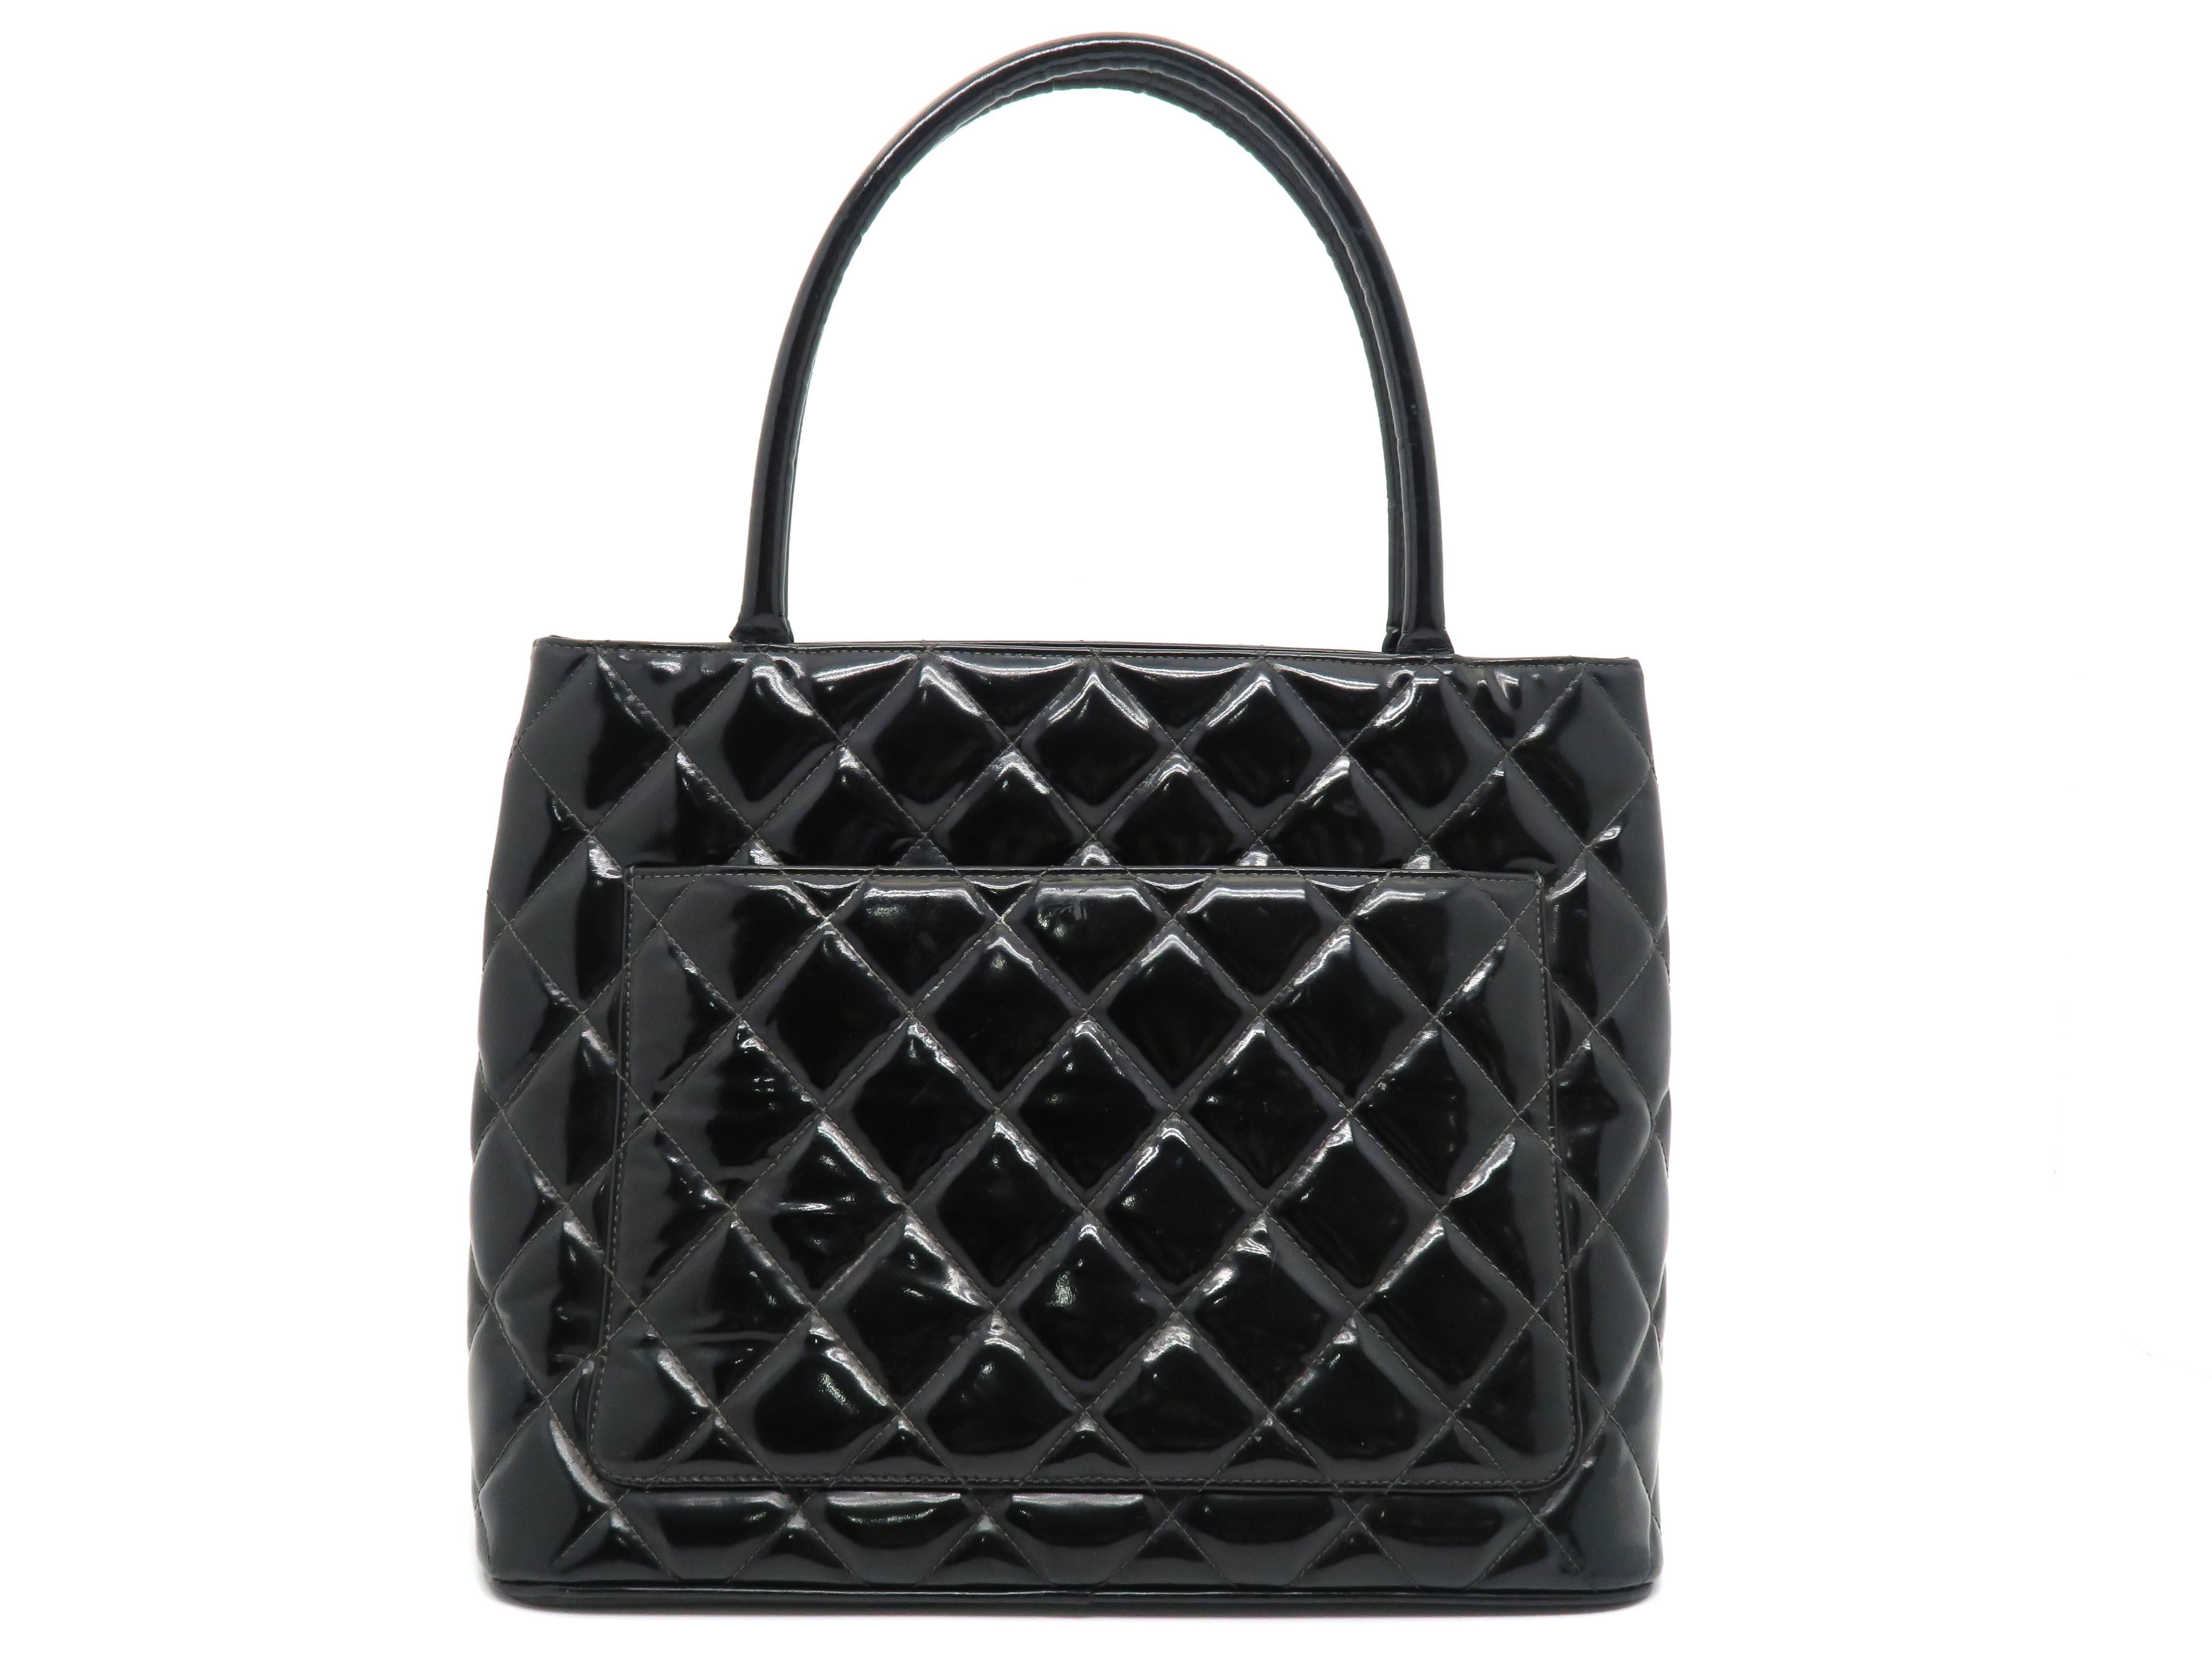 Chanel Black Quilted Patent Leather Handbag In Excellent Condition For Sale In Kowloon, HK